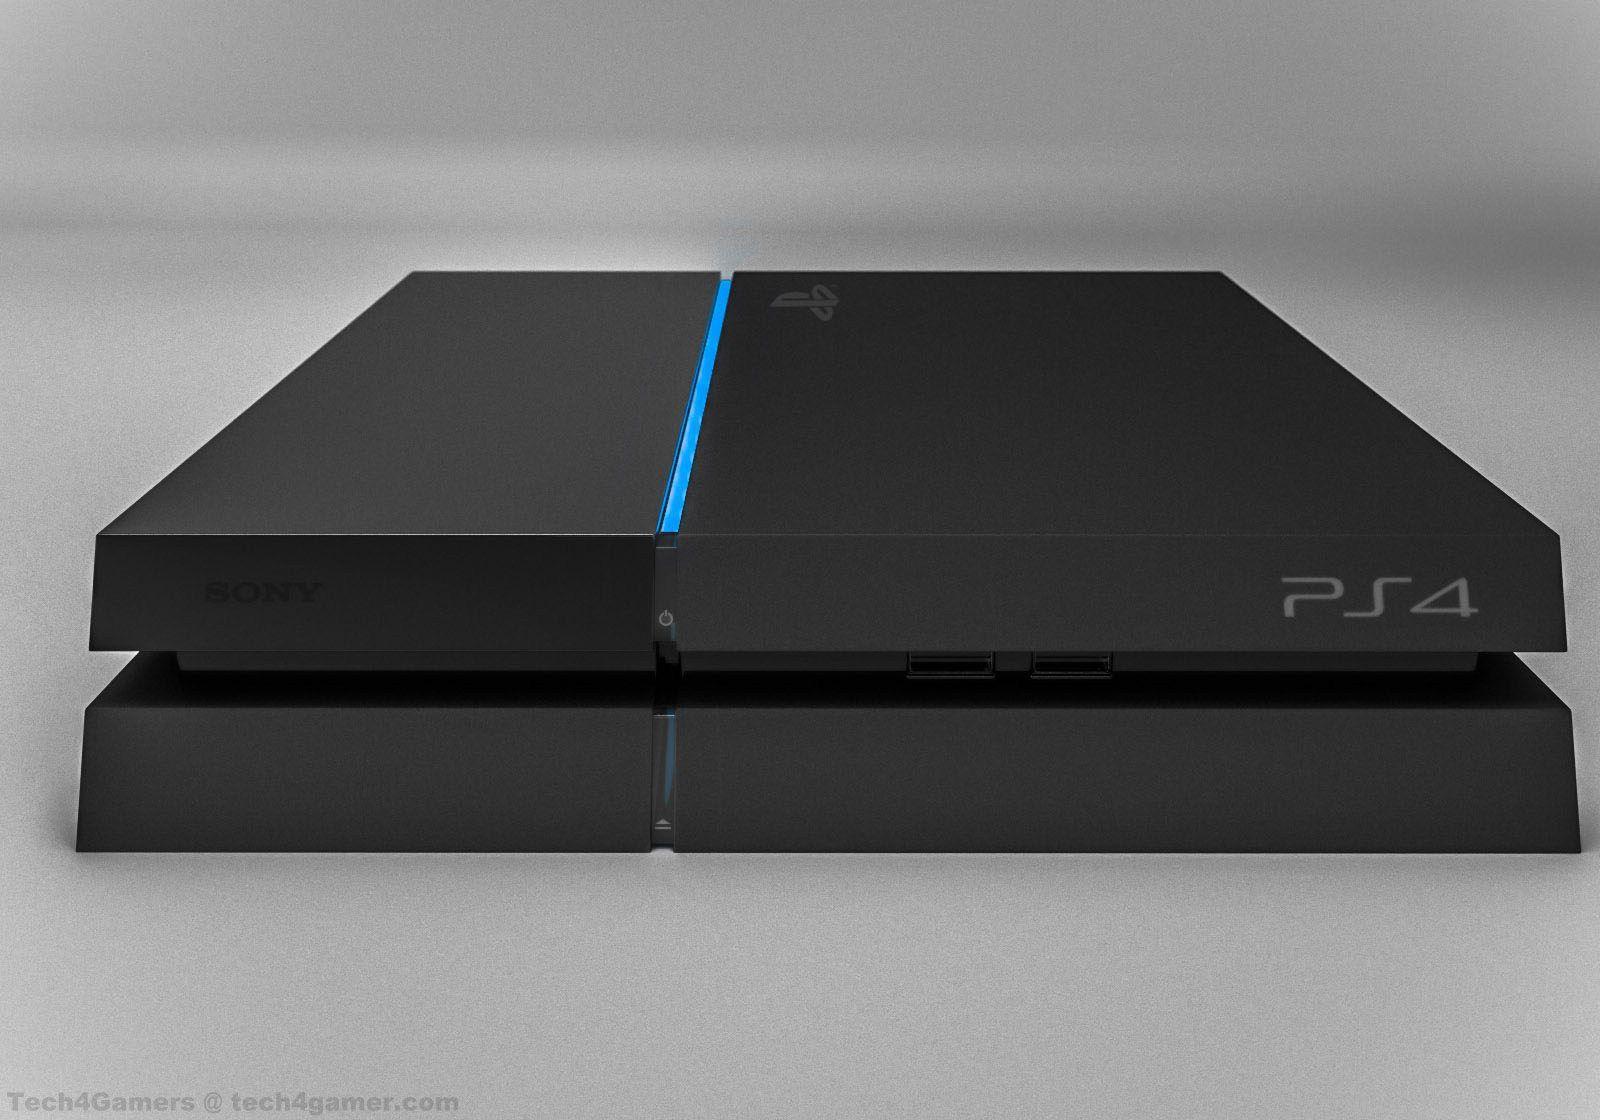 PlayStation 4 20 Million Units Sold Says Sony